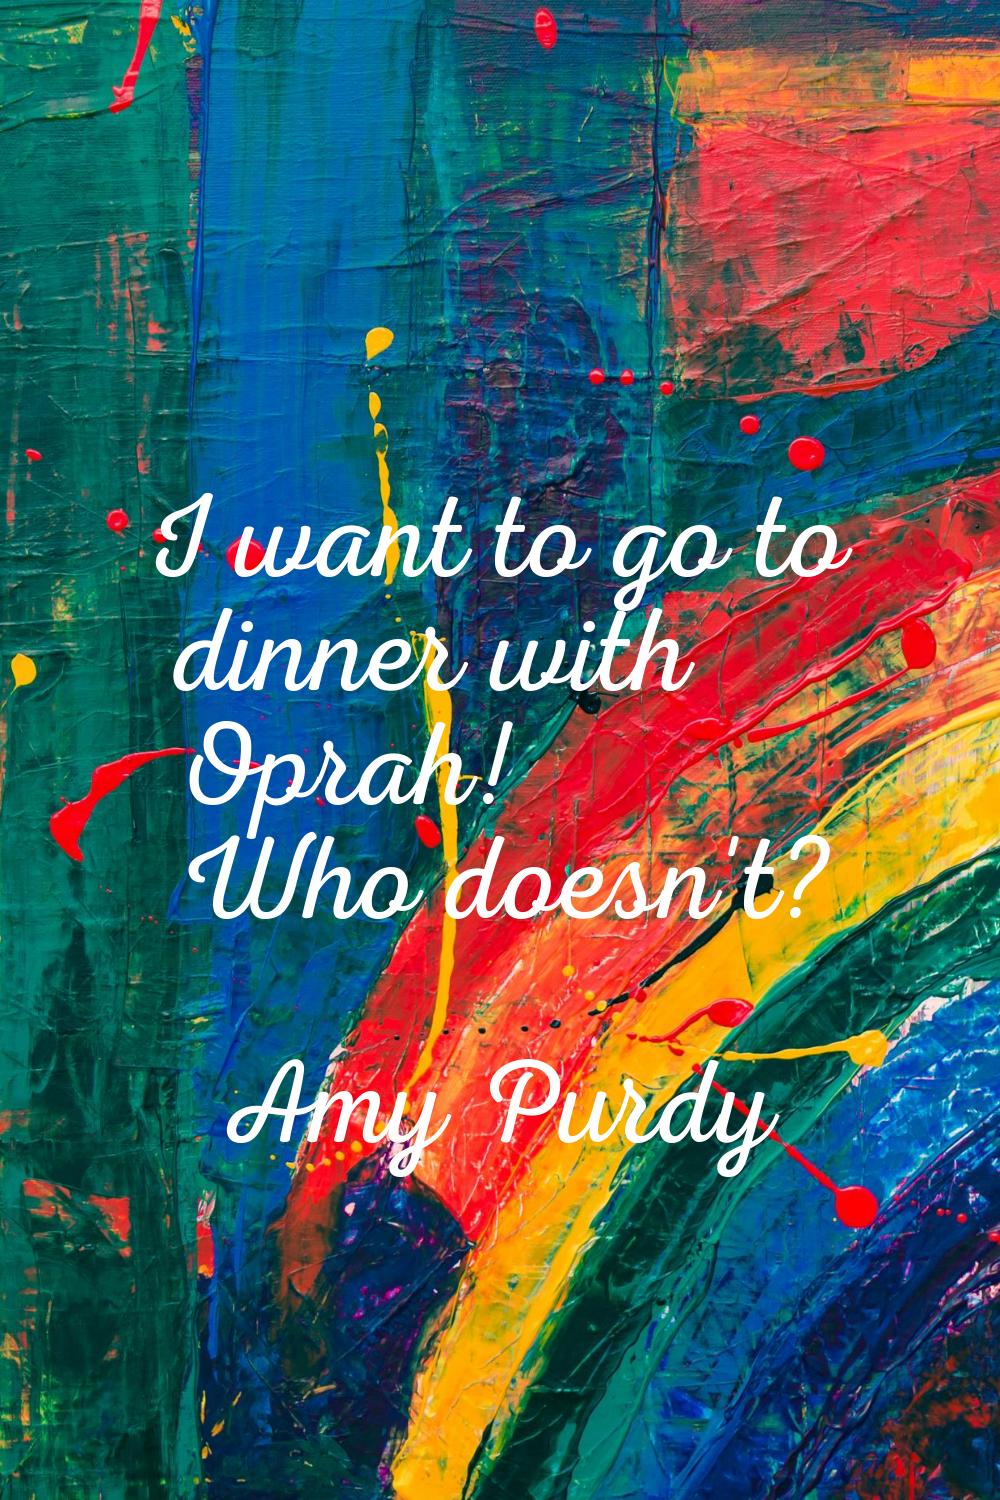 I want to go to dinner with Oprah! Who doesn't?